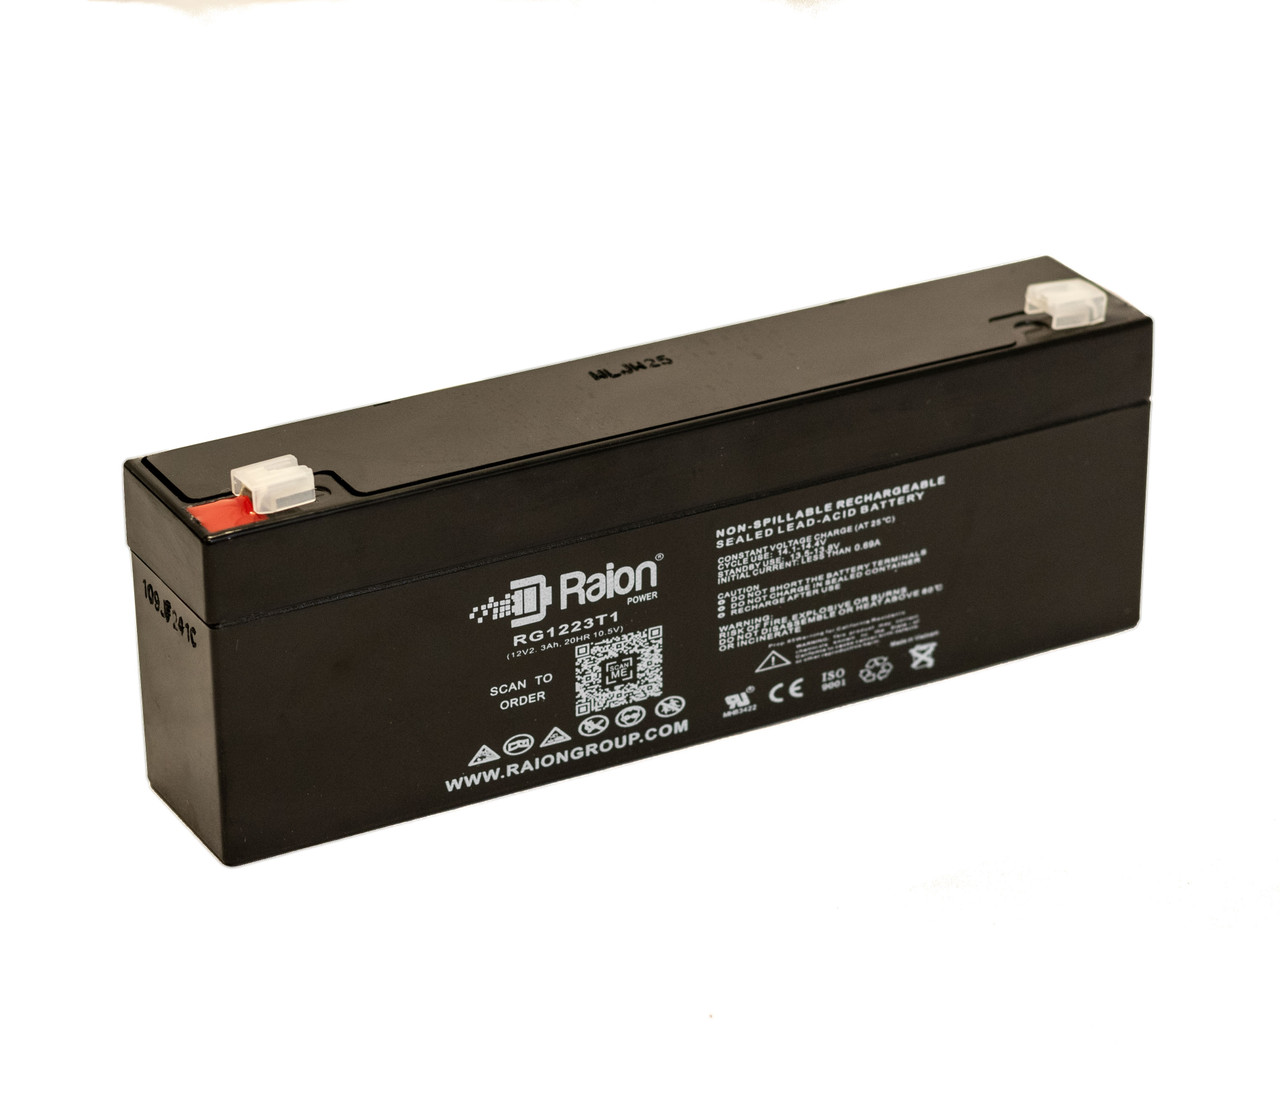 Raion Power RG1223T1 Replacement Battery for BSB GB12-2.2